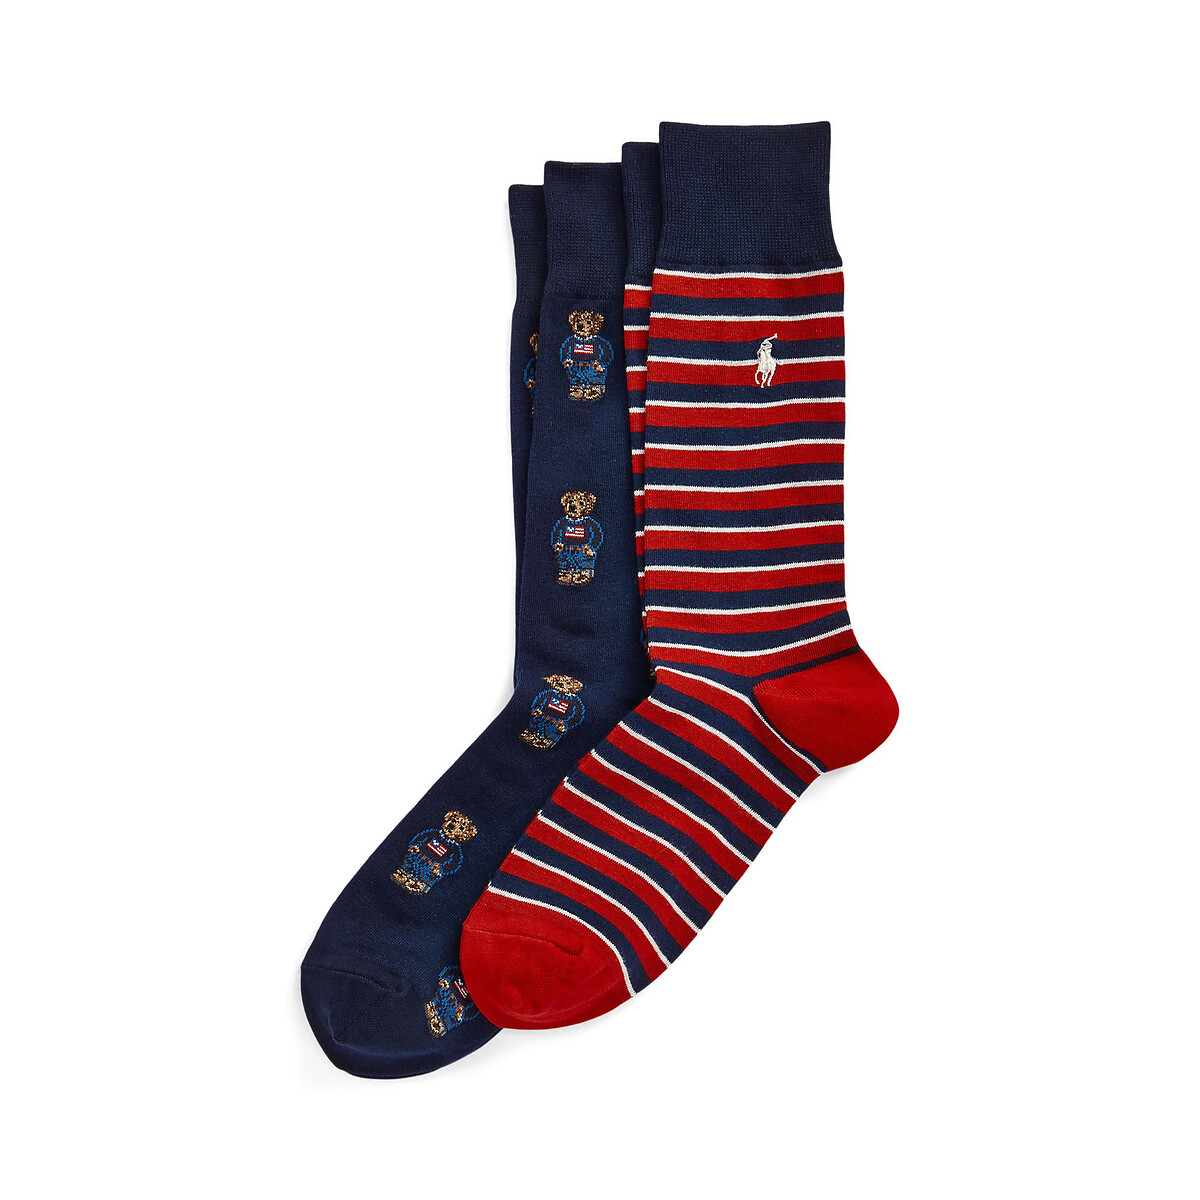 Image of Pack of 2 Pairs of Socks in Combed Cotton Mix